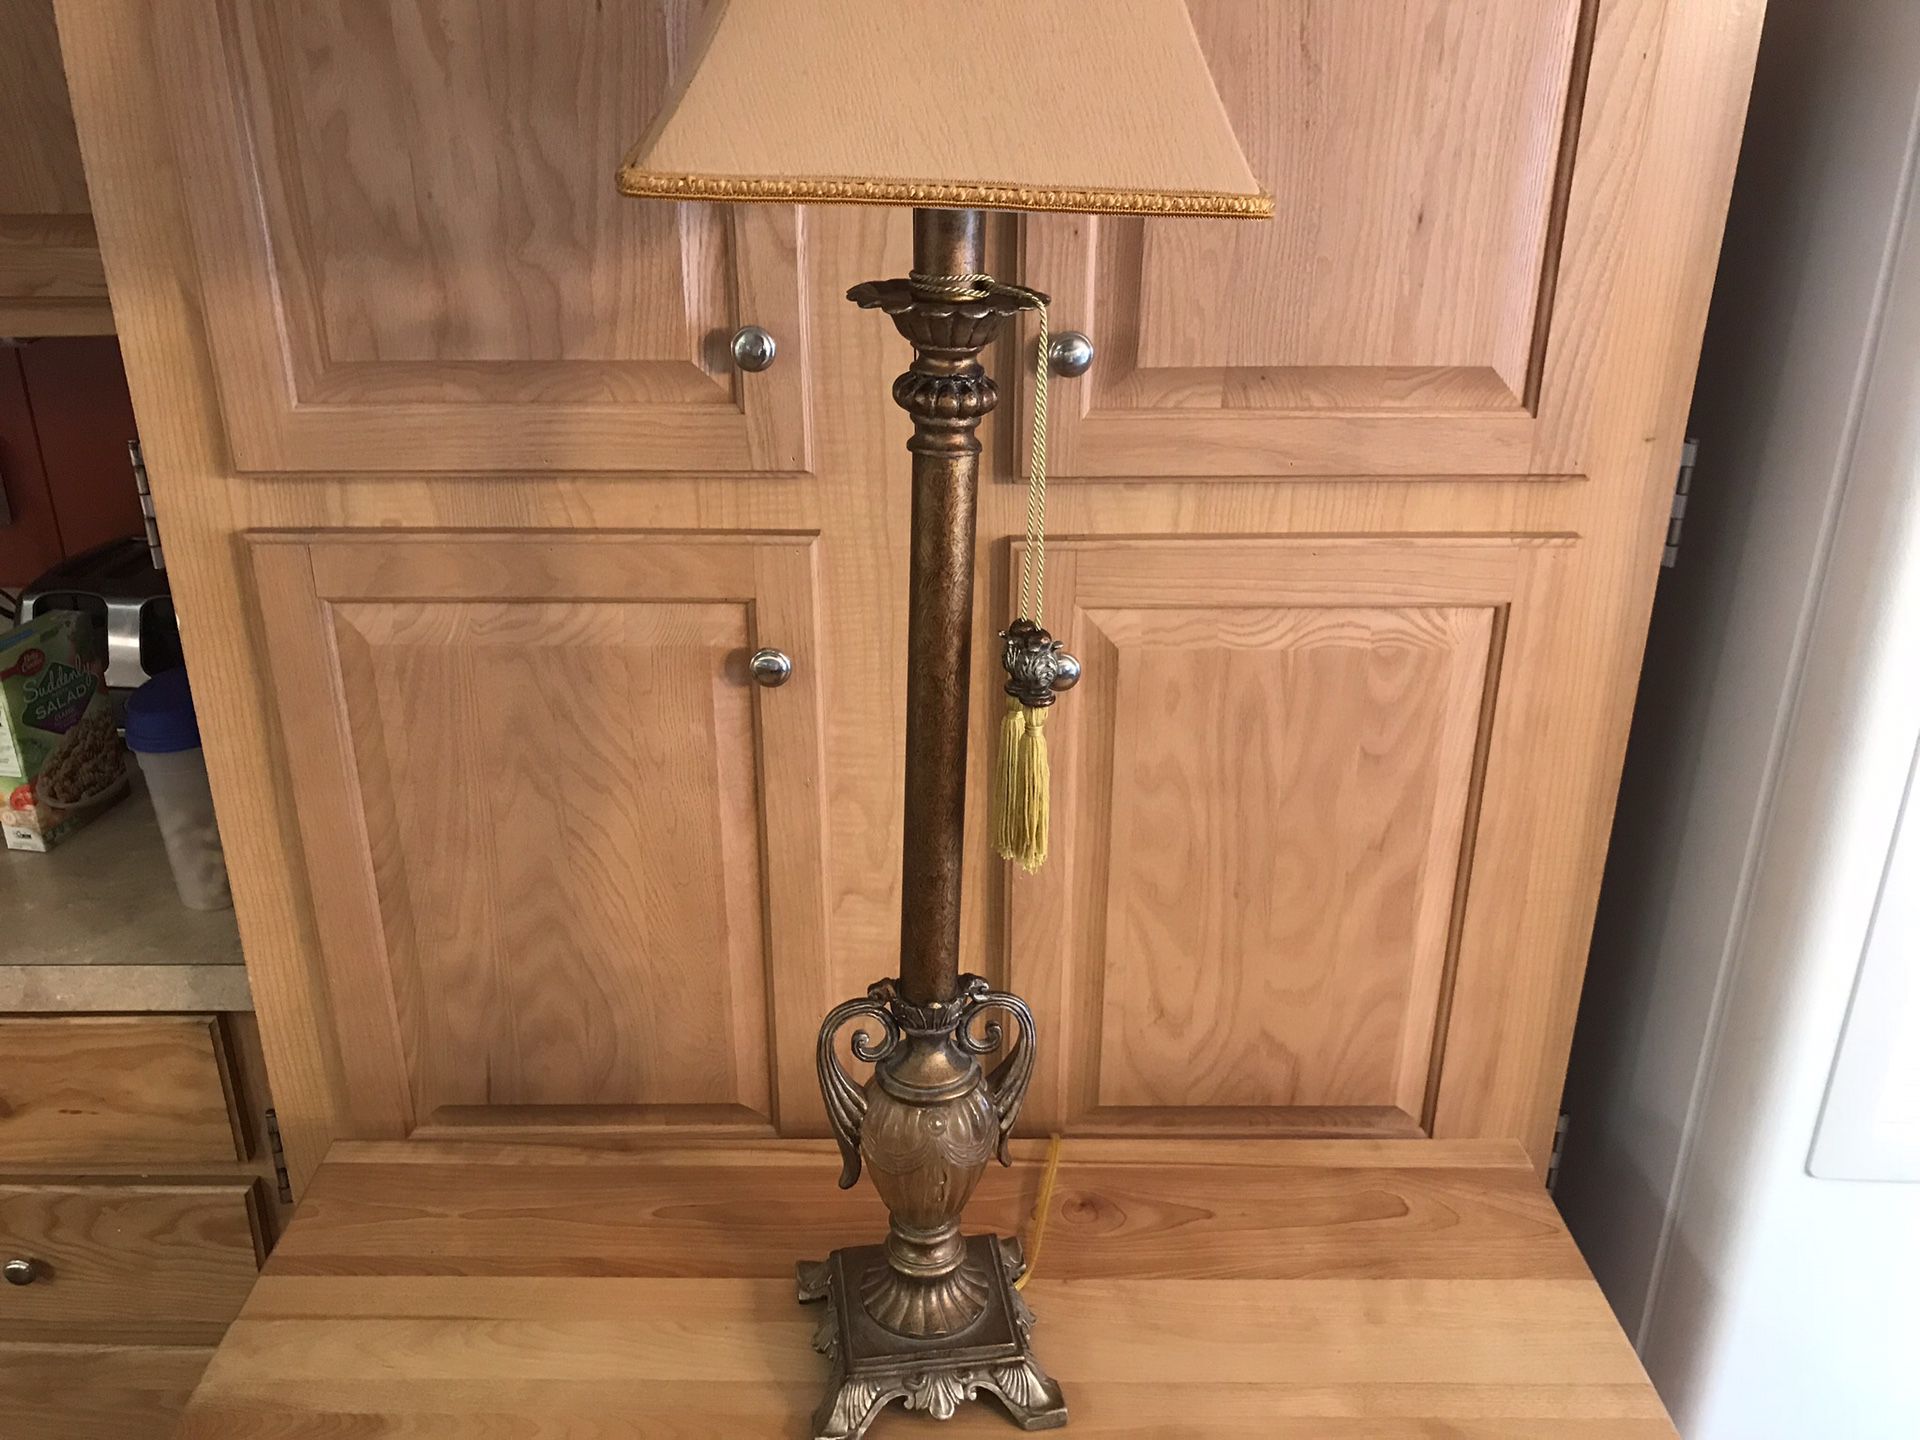 Candle stick lamp with urn base 38” tall